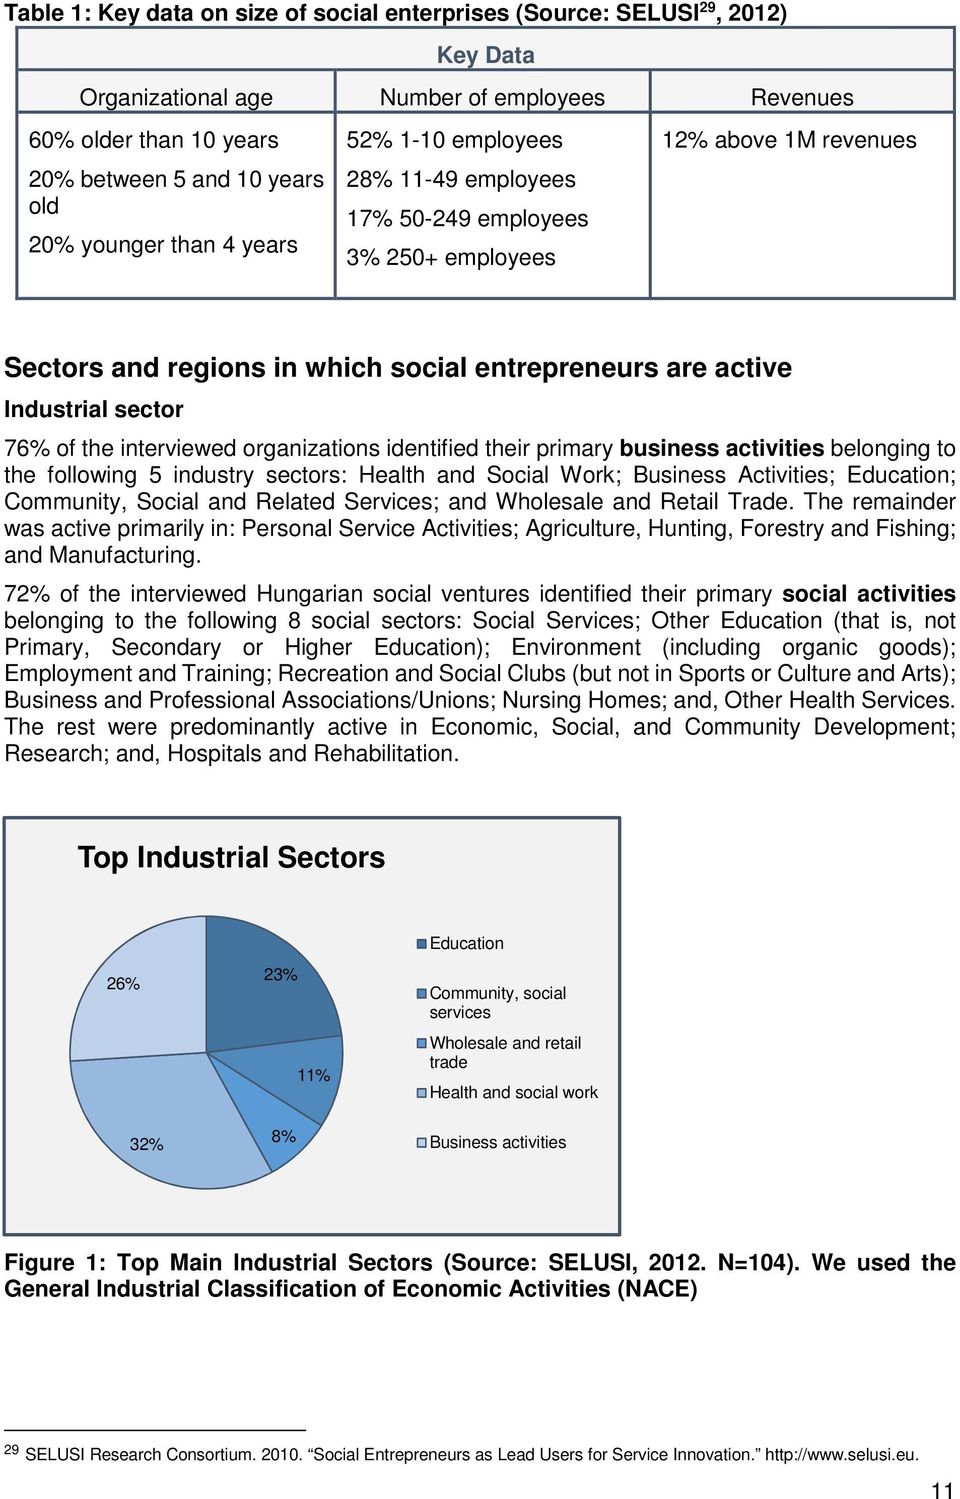 the interviewed organizations identified their primary business activities belonging to the following 5 industry sectors: Health and Social Work; Business Activities; Education; Community, Social and